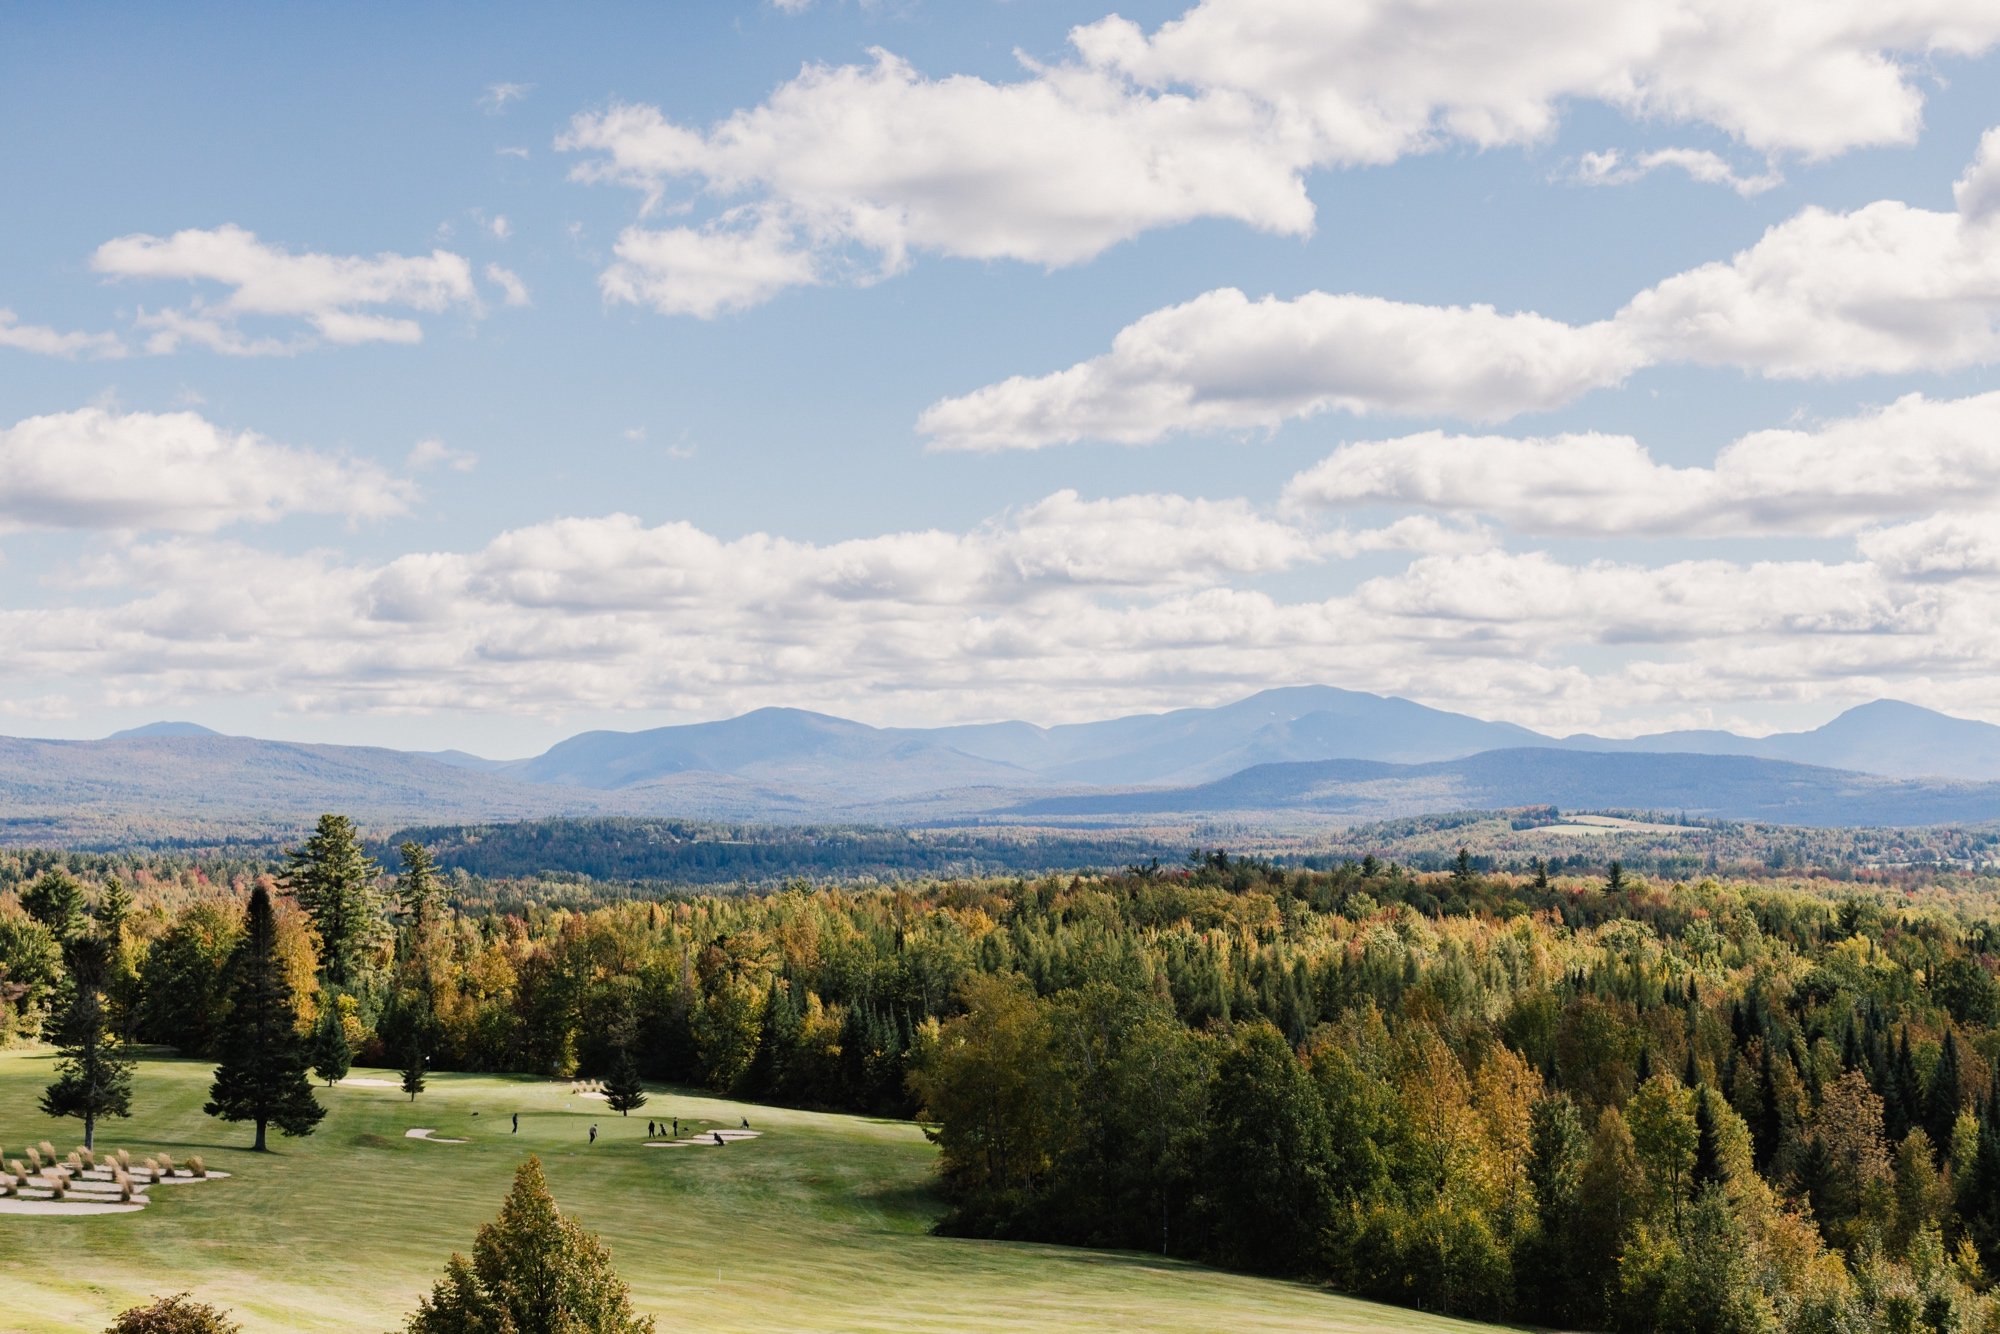 02_whitefield new hampshire NH wedding photography photographer melanie voros blissful events Mountain View Grand Resort and Spa frenchs point washington white mountains MVG.jpg